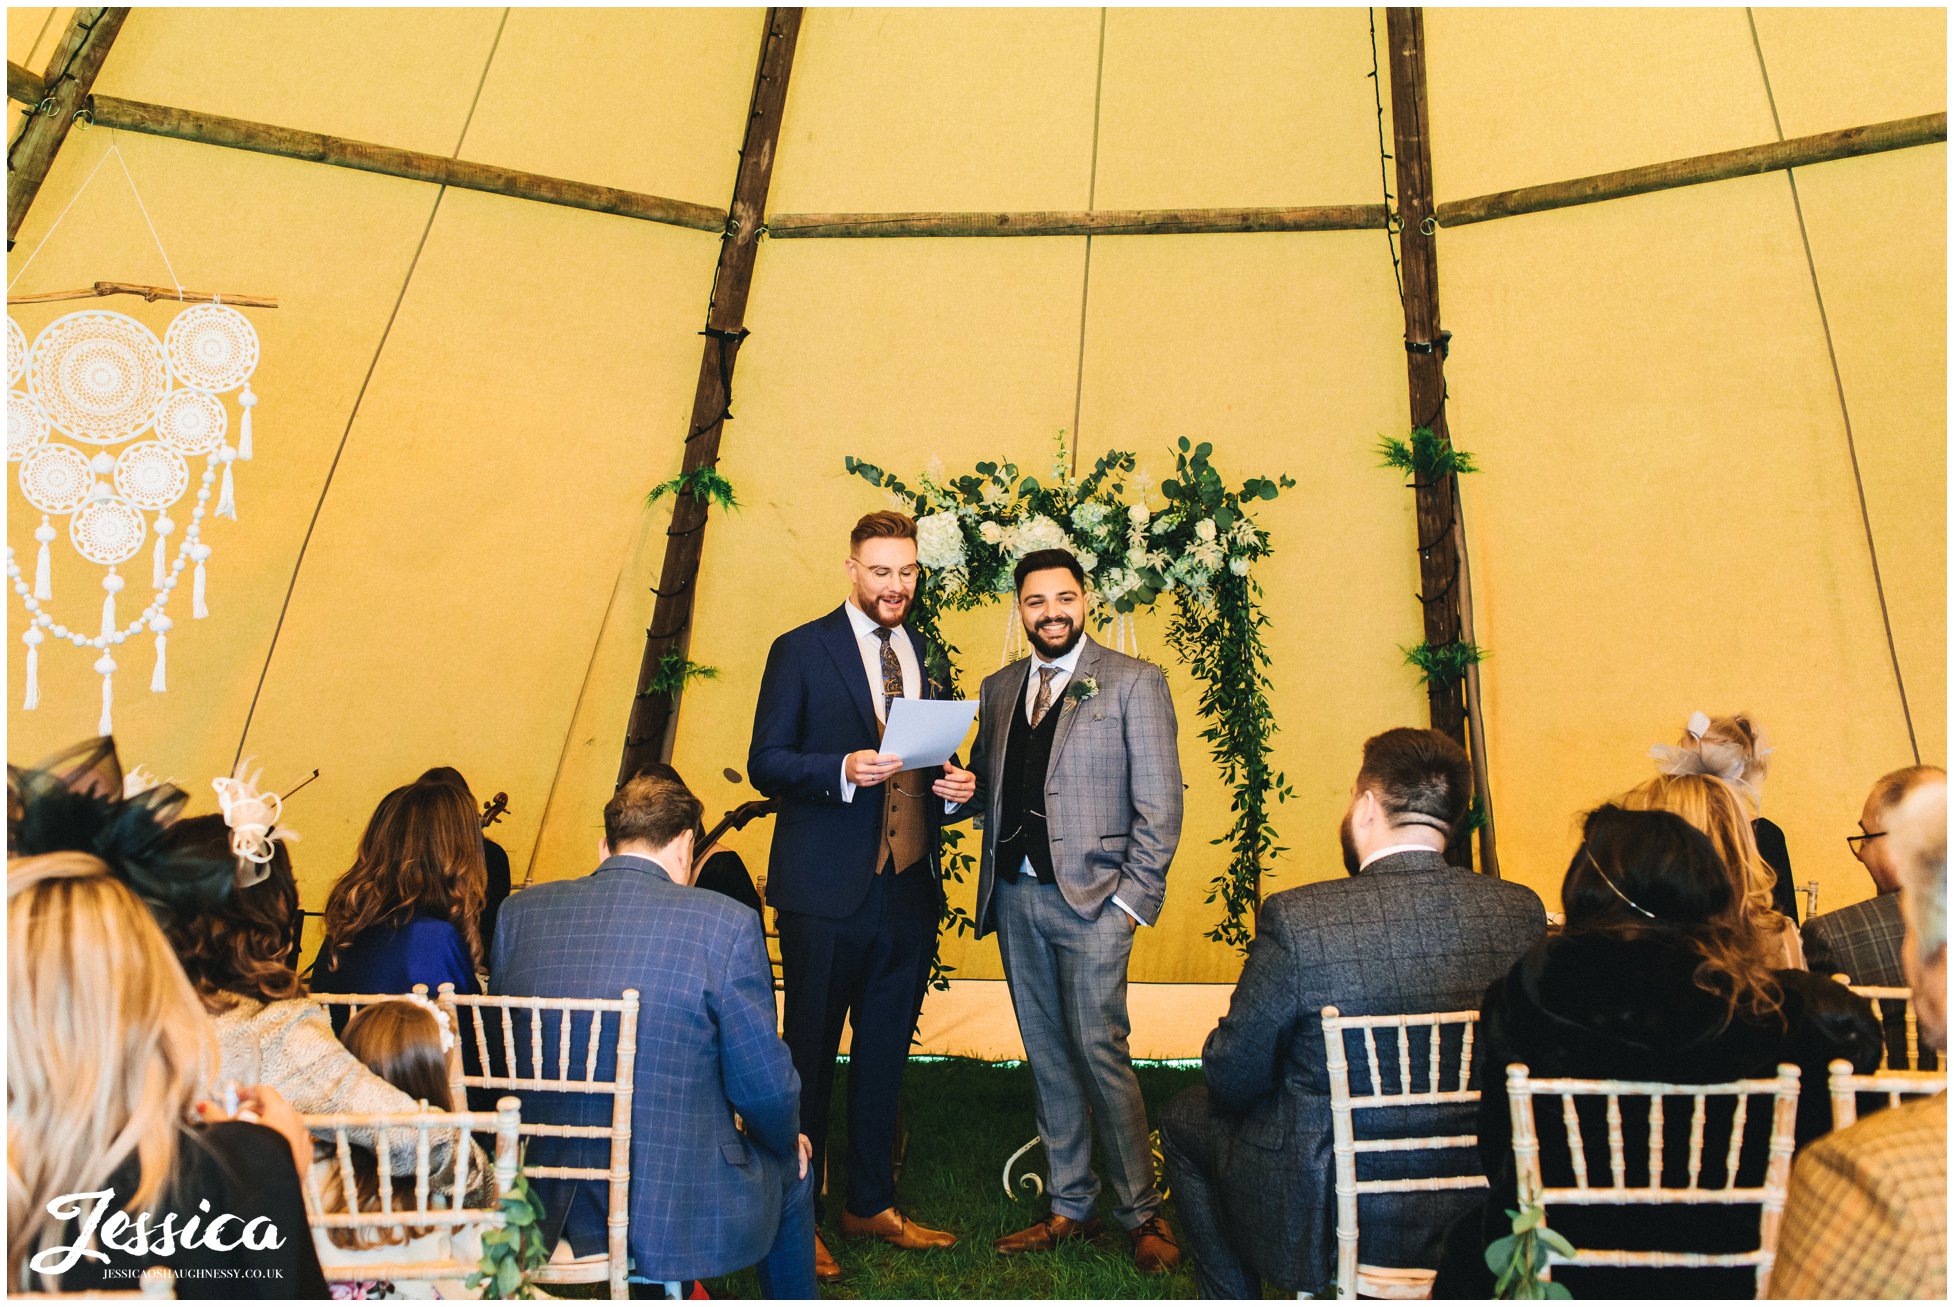 The grooms give speeches during their tipi ceremony